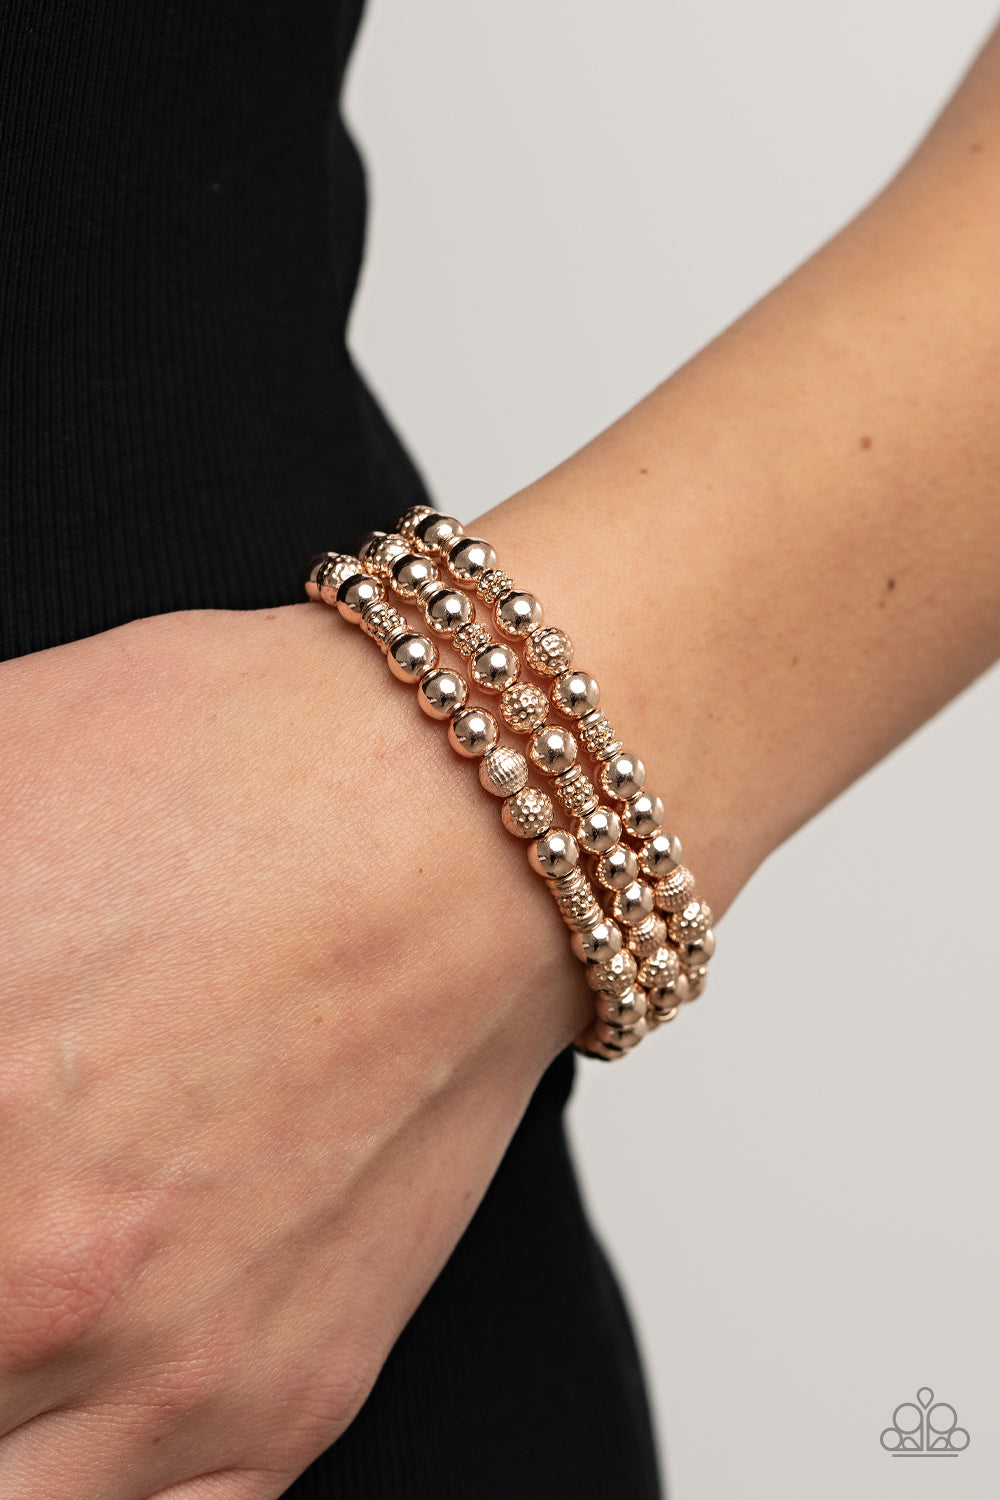 Paparazzi Accessories - Boundless Boundaries - Rose Gold Bracelets a shiny collection of smooth, studded, and textured rose gold beads are threaded along stretchy bands around the wrist, creating dainty layers.  Sold as one set of three bracelets.